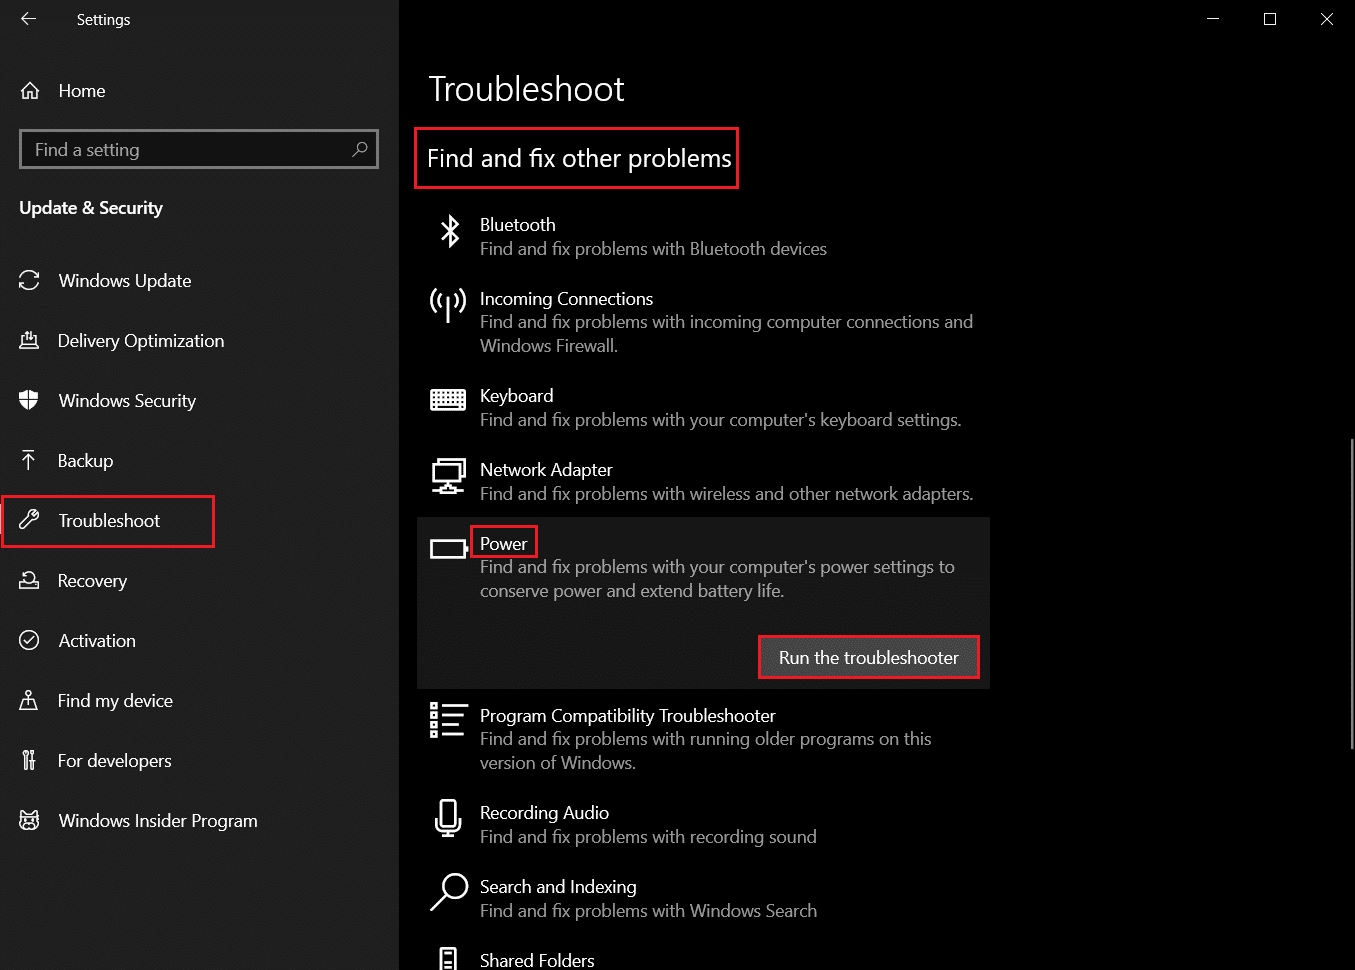 go to Troubleshoot settings menu and scroll down to Find and Fix other problems, select Power and click on Run this troubleshooter